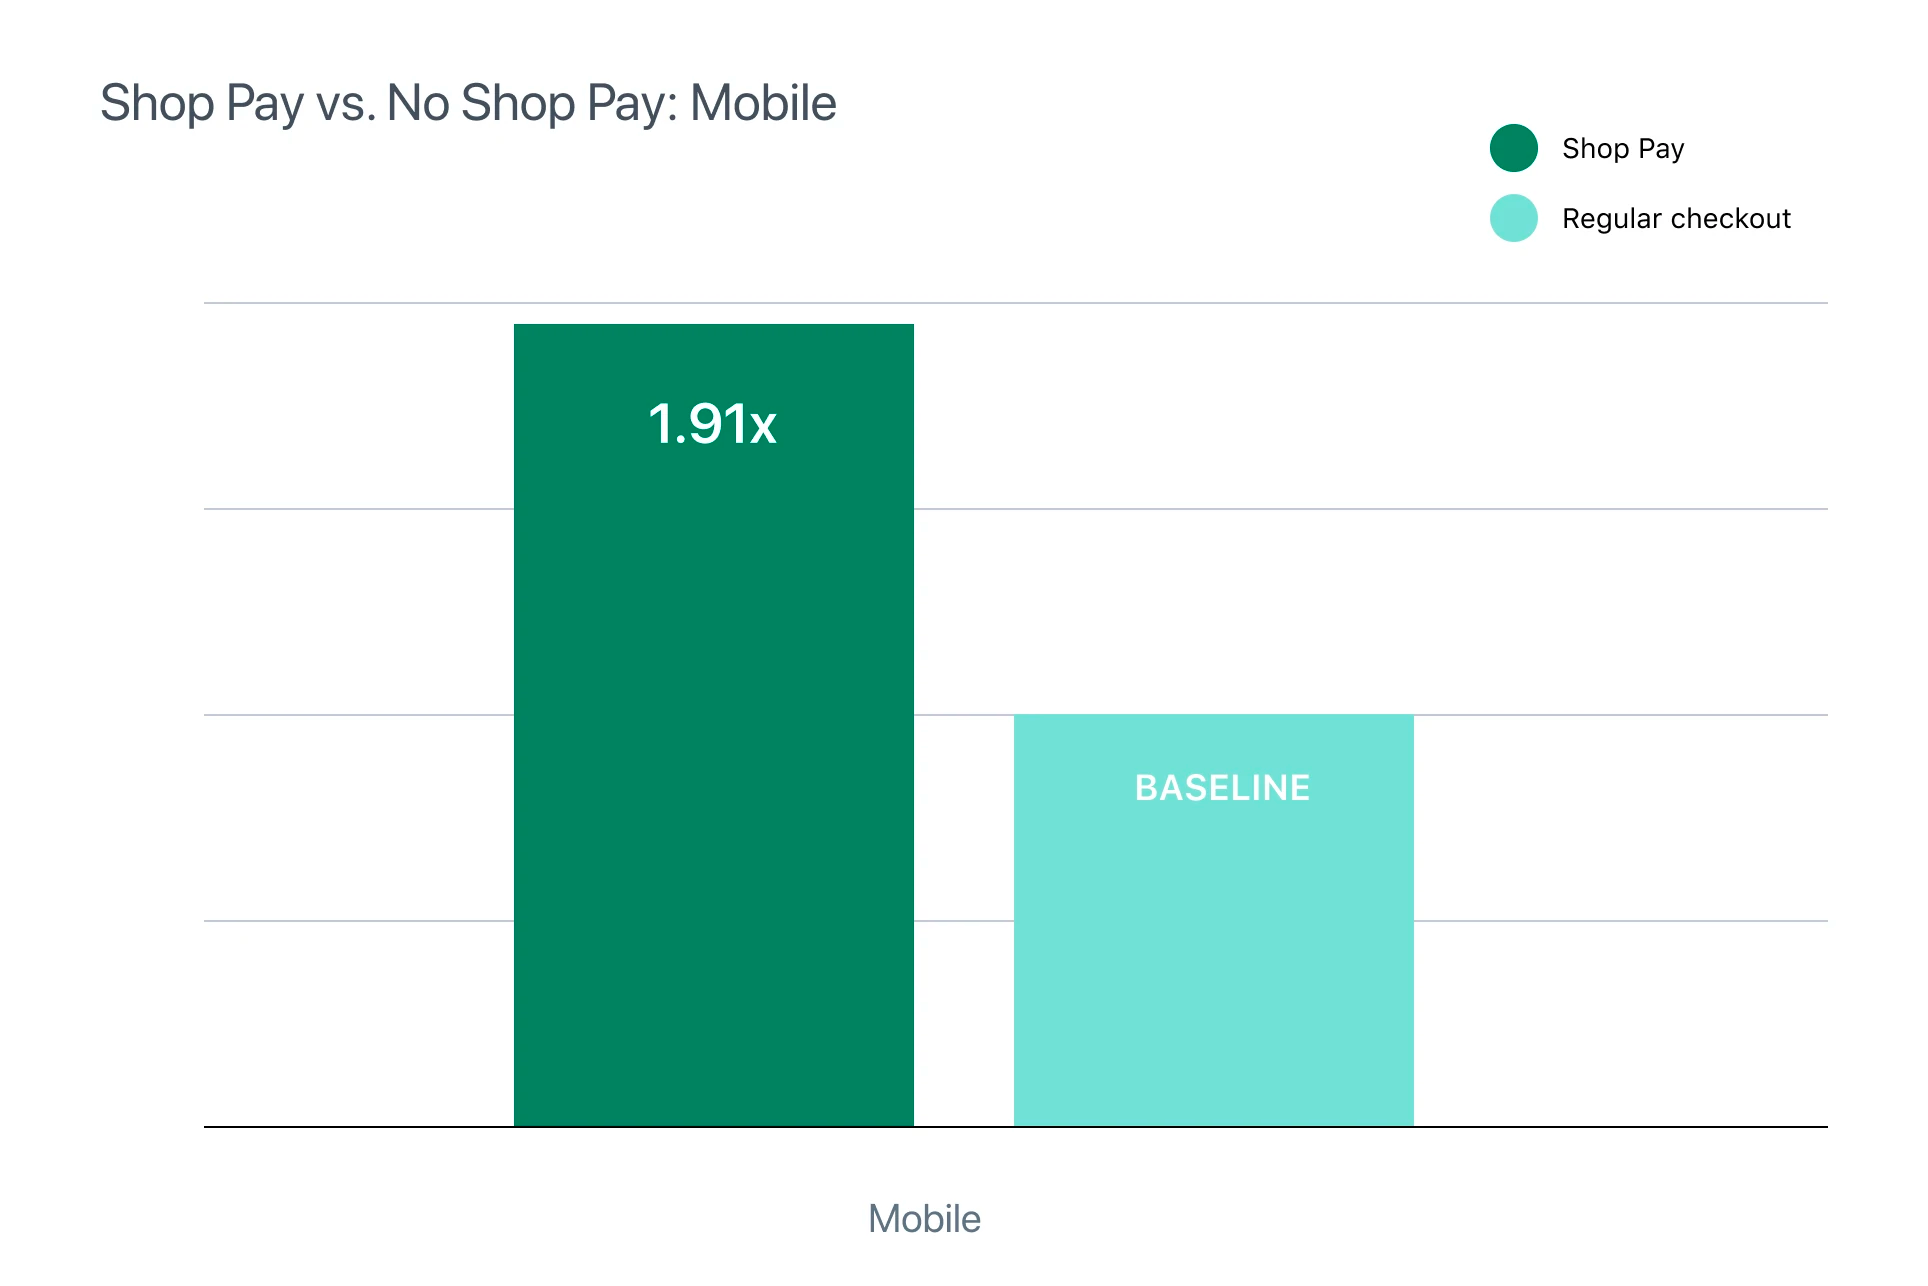 Image of the checkout experience of Shop Pay vs. Non-Shop Pay on mobile devices